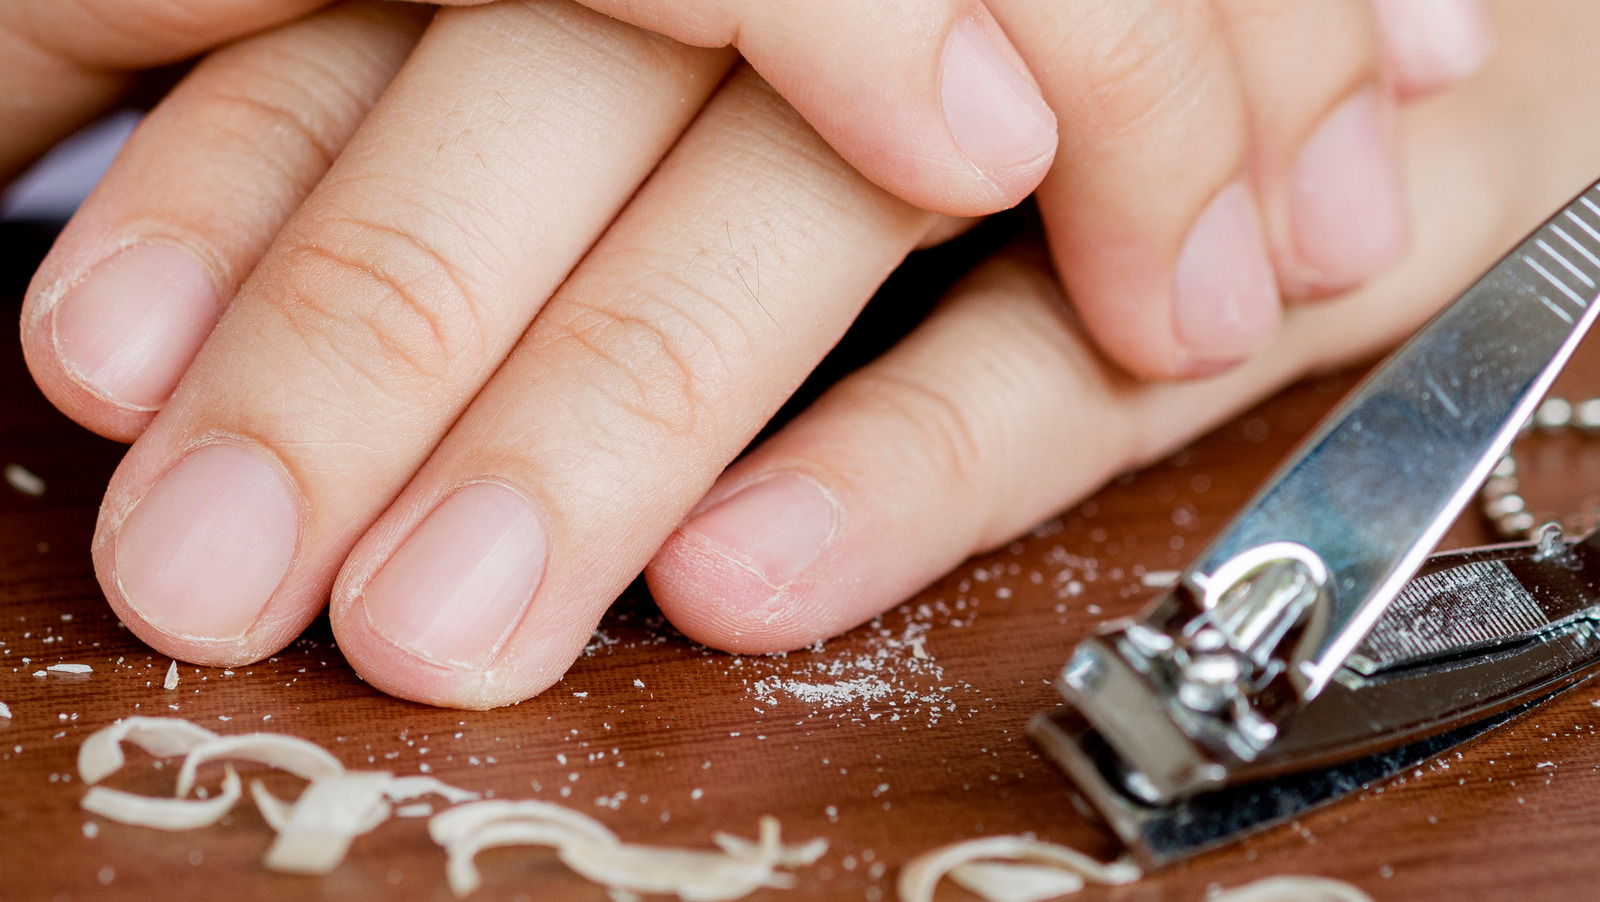 This Is What You Should Do If You Cut Your Nails Too Short